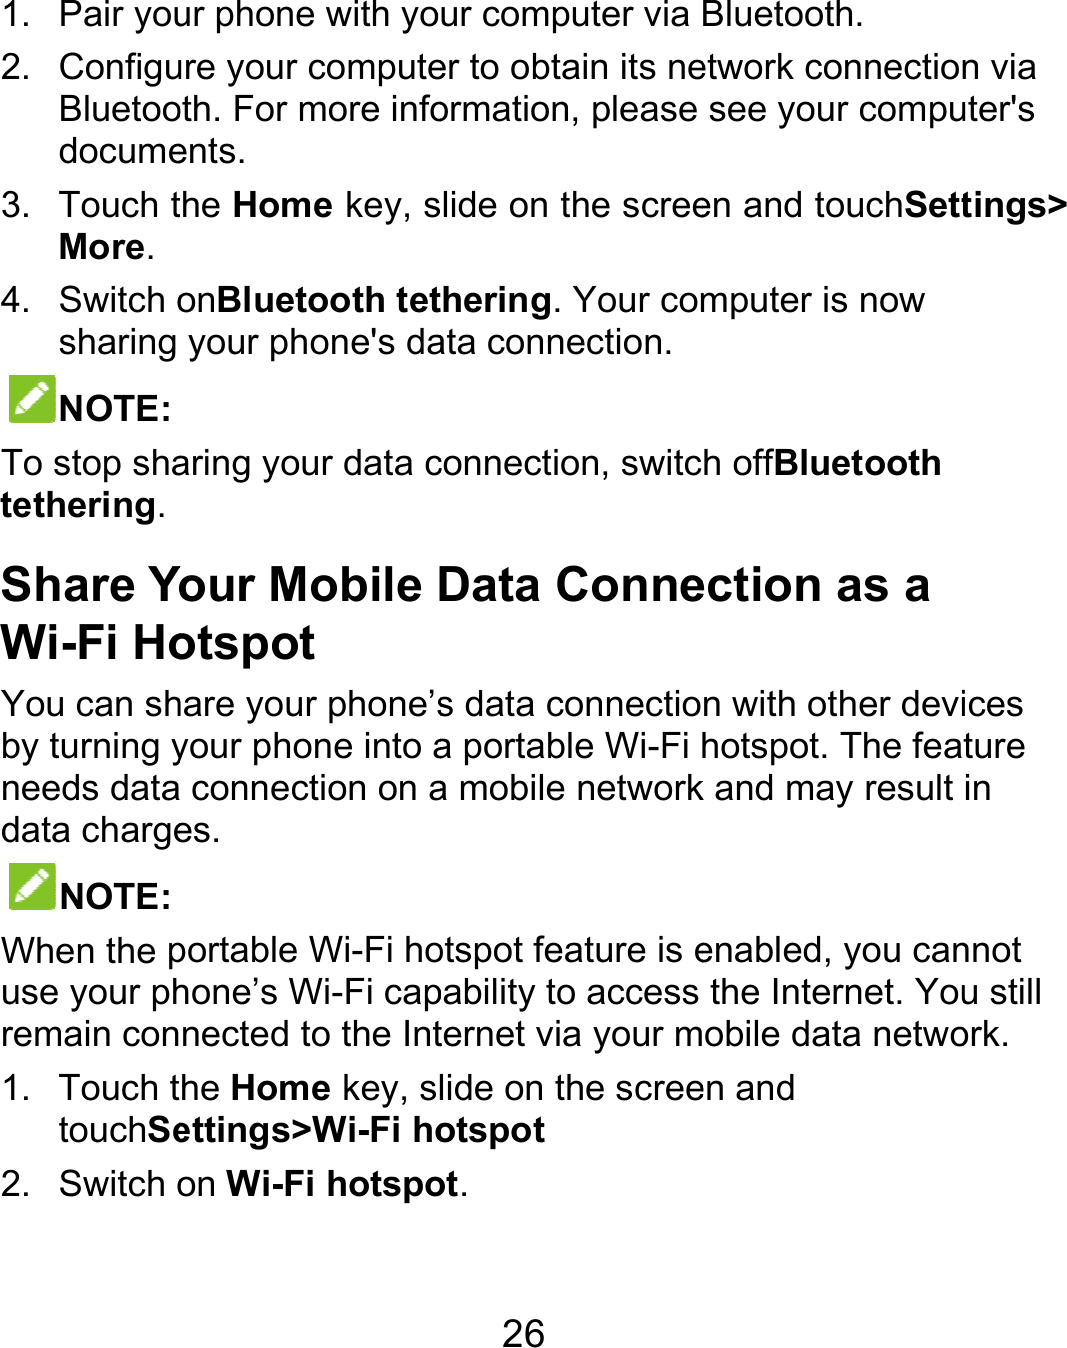  1. Pair you2. ConfiguBluetoodocume3. Touch tMore. 4. Switch osharing NOTE: To stop shatethering. Share YWi-Fi HoYou can shby turning yneeds datadata chargeNOTE: When the puse your phremain con1. Touch ttouchSe2. Switch o ur phone with youre your computeoth. For more infoents. the Home key, sonBluetooth tetyour phone&apos;s daaring your data cYour Mobile Dotspot hare your phone’syour phone into aa connection on aes.  portable Wi-Fi hohone’s Wi-Fi capnected to the Inthe Home key, slettings&gt;Wi-Fi hoon Wi-Fi hotspo26 ur computer via er to obtain its neormation, please lide on the screehering. Your comata connection.connection, switcData Connes data connectioa portable Wi-Fi a mobile networkotspot feature is epability to access ternet via your mlide on the screeotspot ot.   Bluetooth. etwork connectionsee your compuen and touchSettmputer is now h offBluetooth ection as a n with other devihotspot. The feak and may result enabled, you canthe Internet. Youobile data netwoen and n via uter&apos;s tings&gt; ices ture in nnot u still ork. 